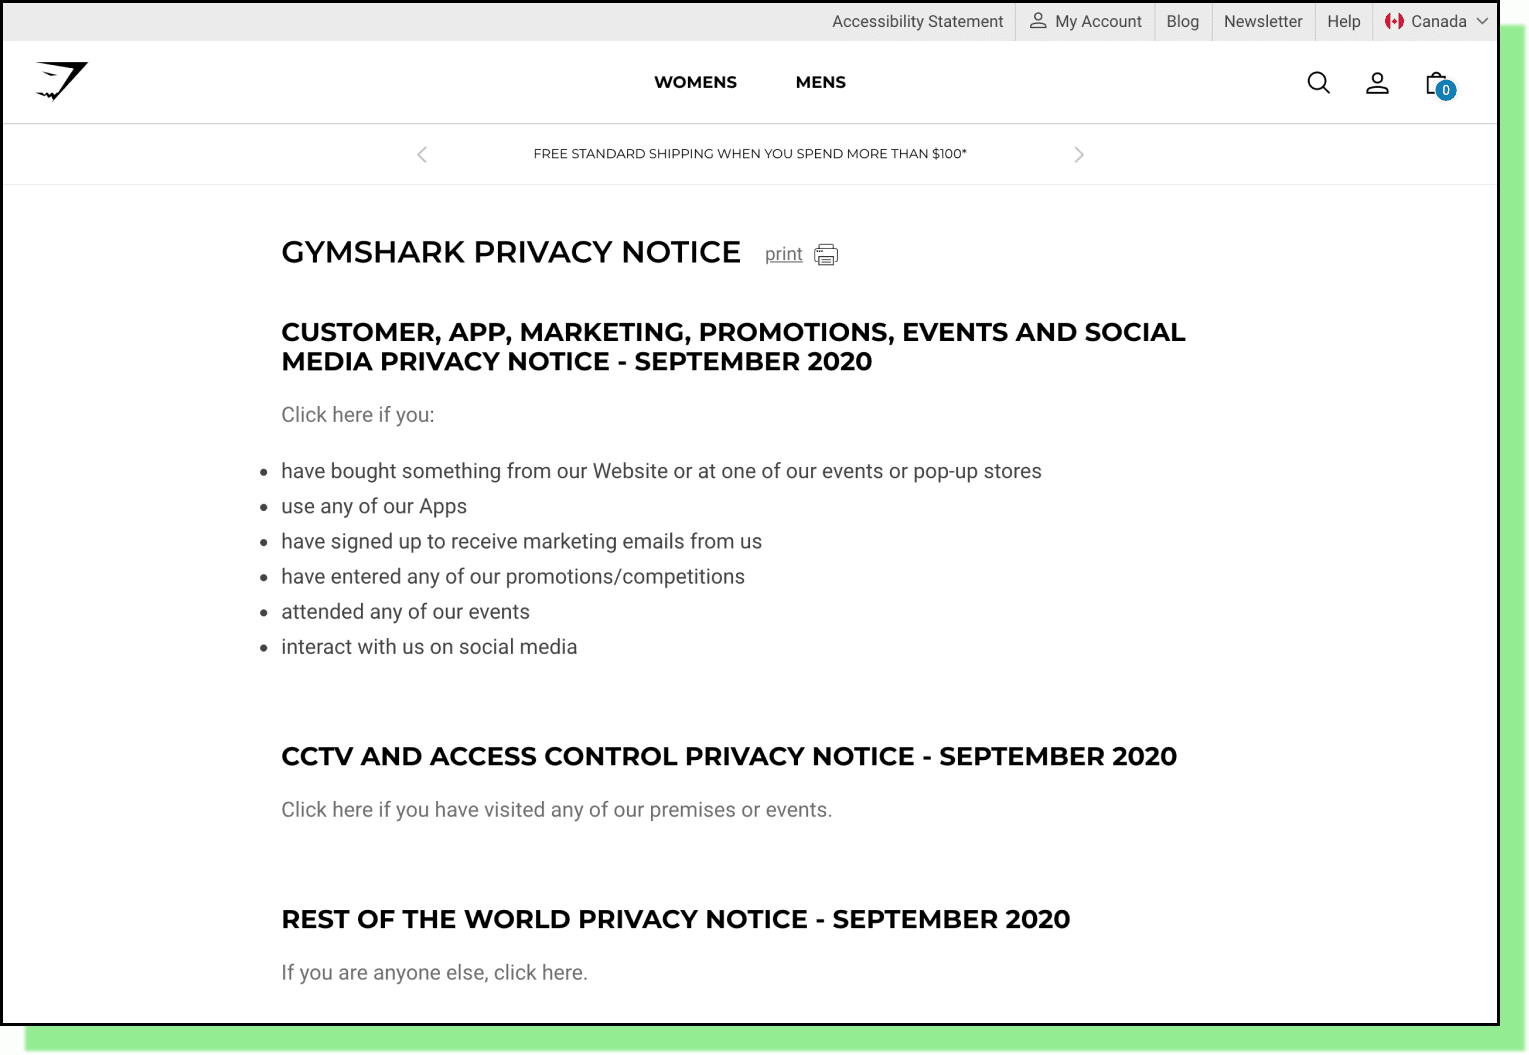 GymShark Privacy Policy